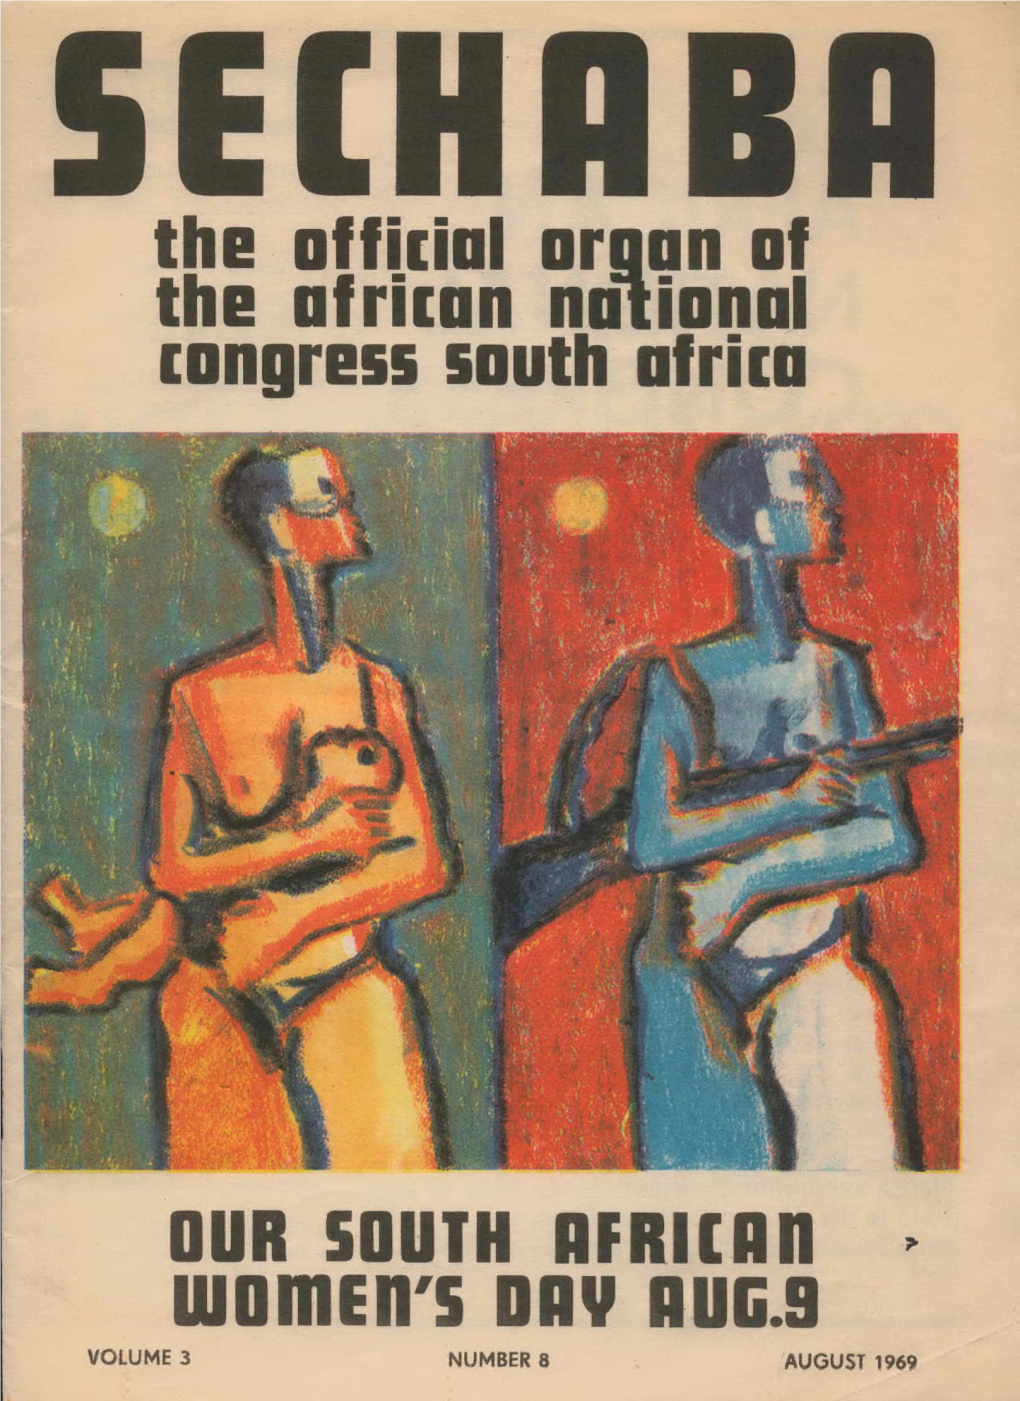 The Official Organ of the Ofriion Notional Congress Sooth Afriia